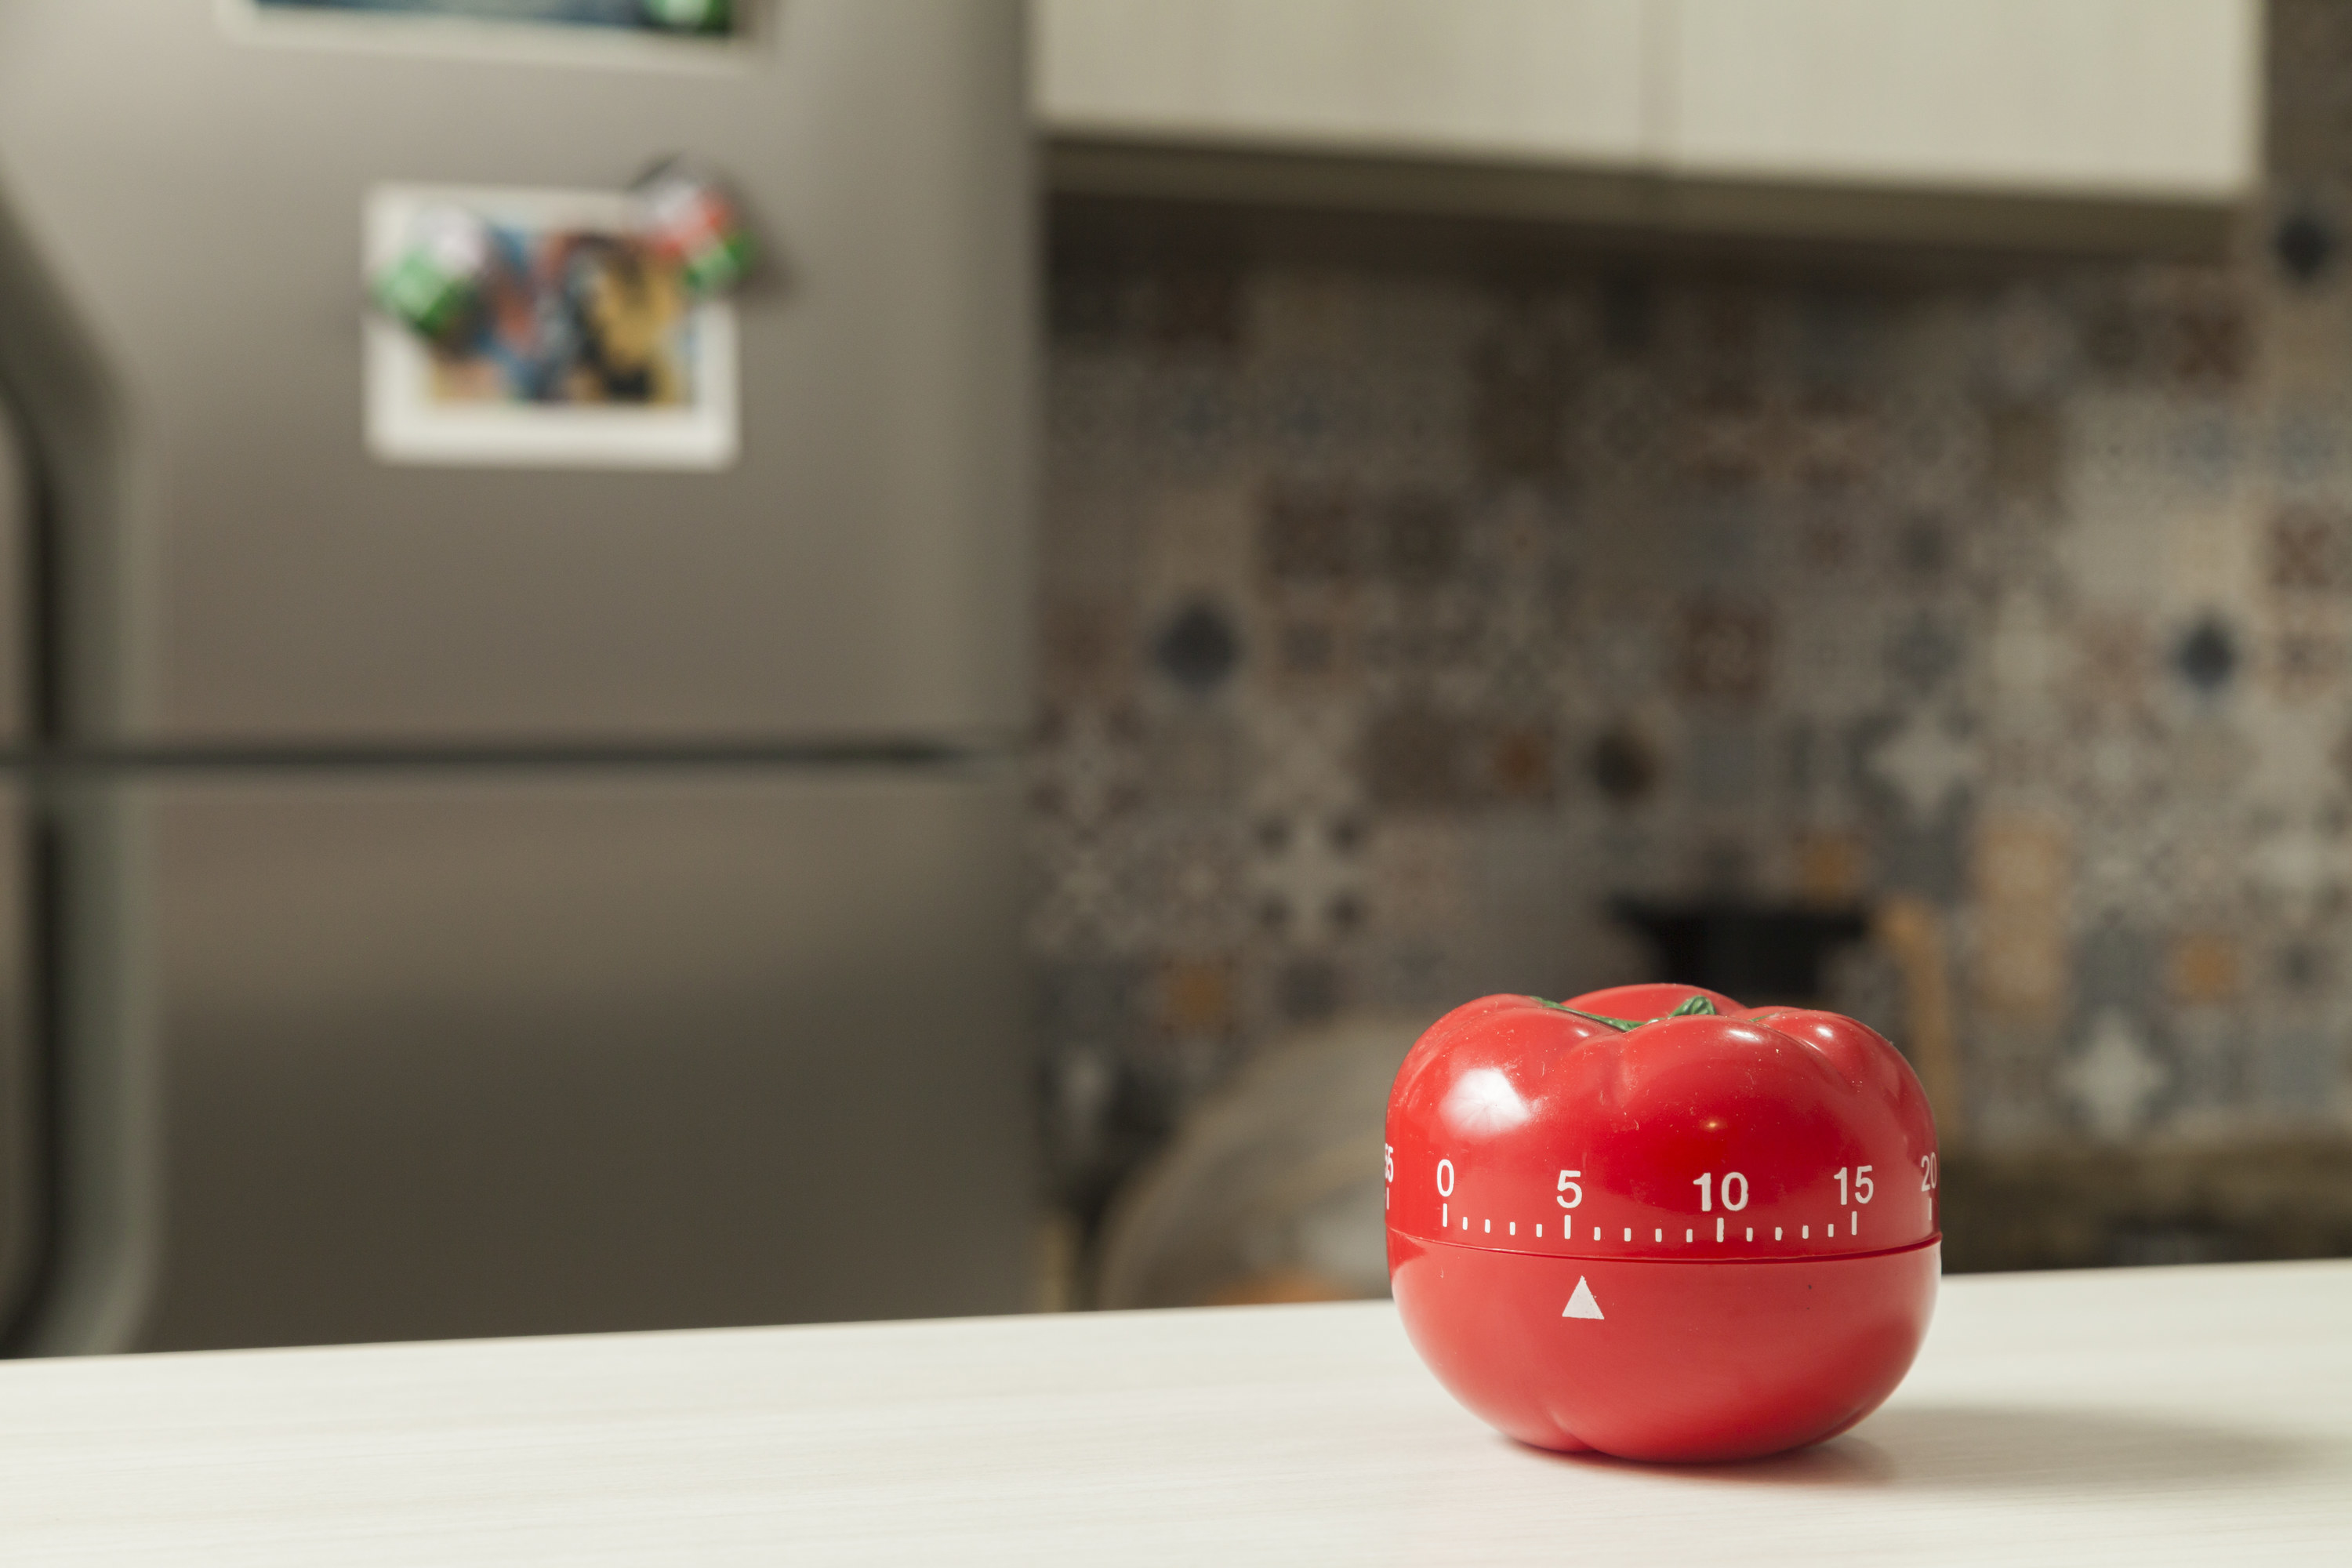 tomato-shaped kitchen timer on a counter